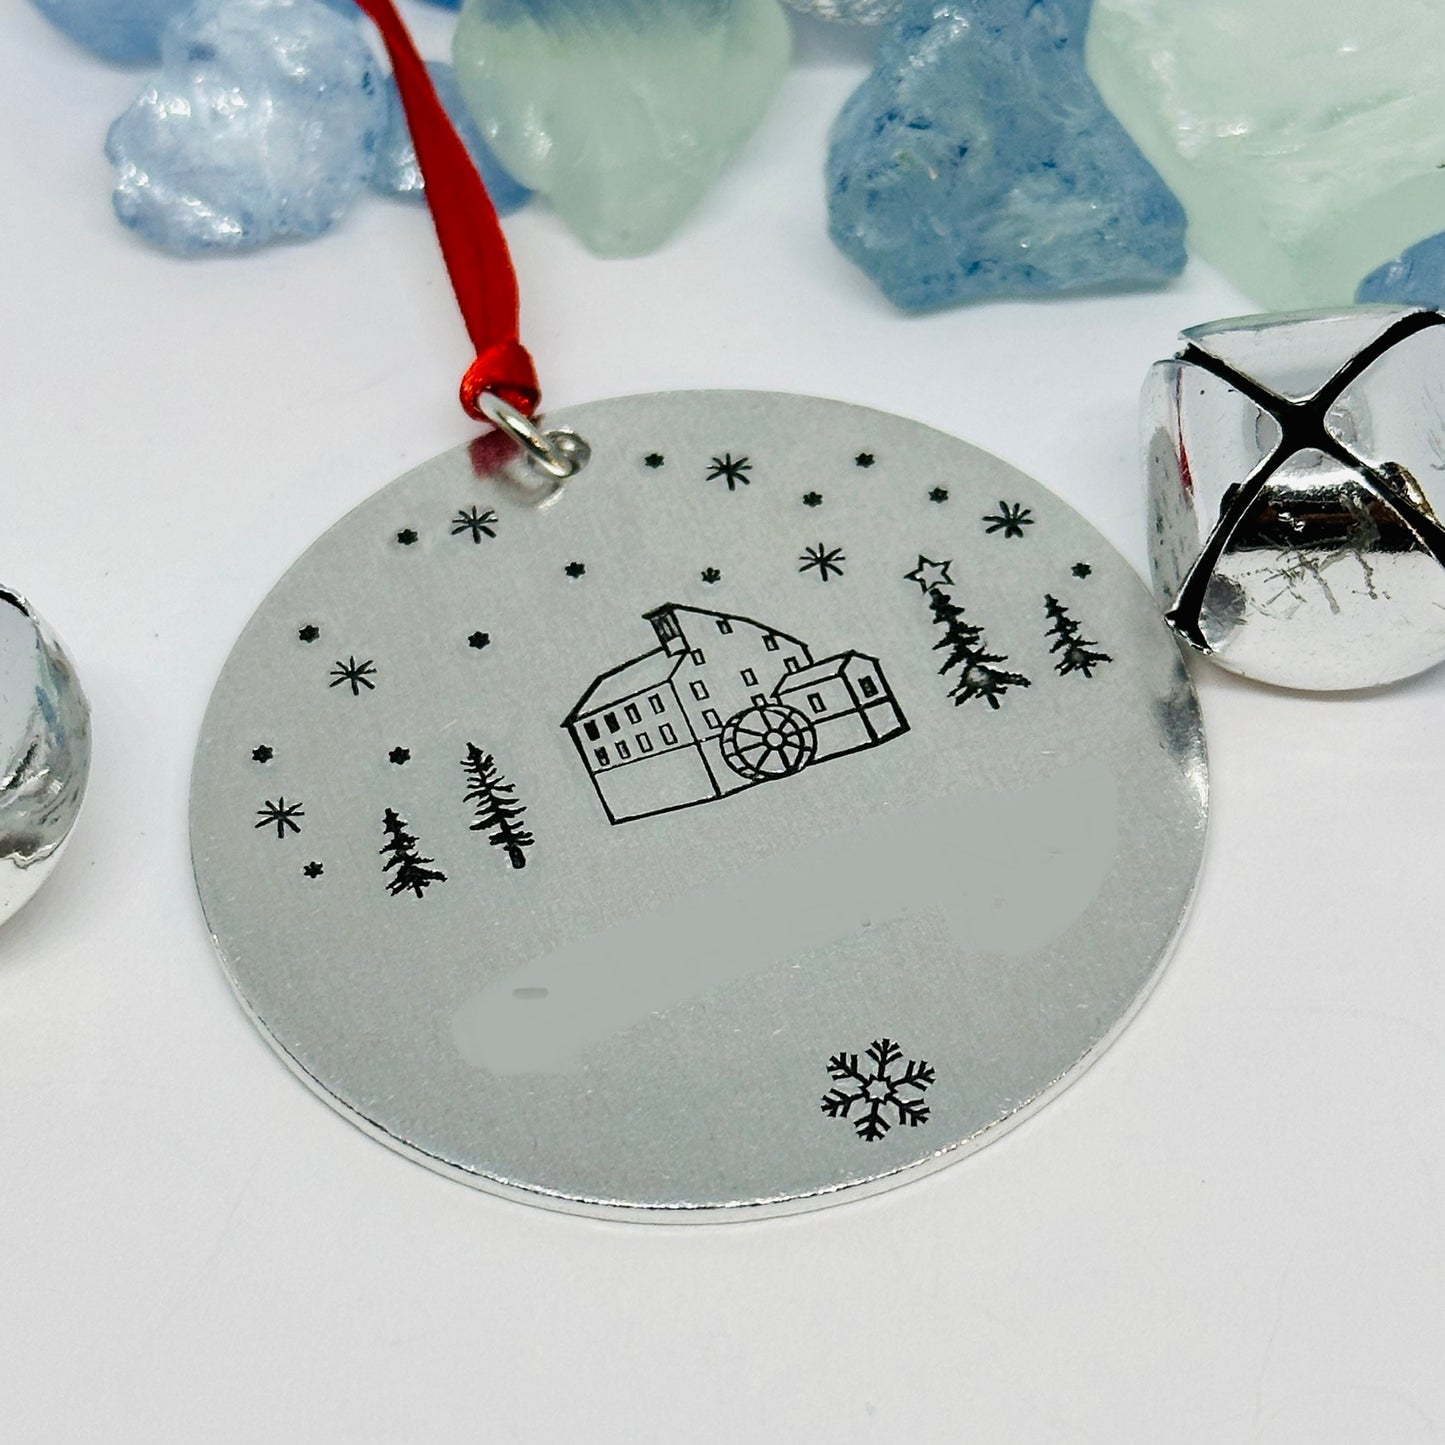 Grist Mill Hand Stamped Ornament | Clinton NJ Red Mill Museum Aluminum Round Ornament | Christmas | Hand Crafted Tree Decor | Holiday Decoration 2022